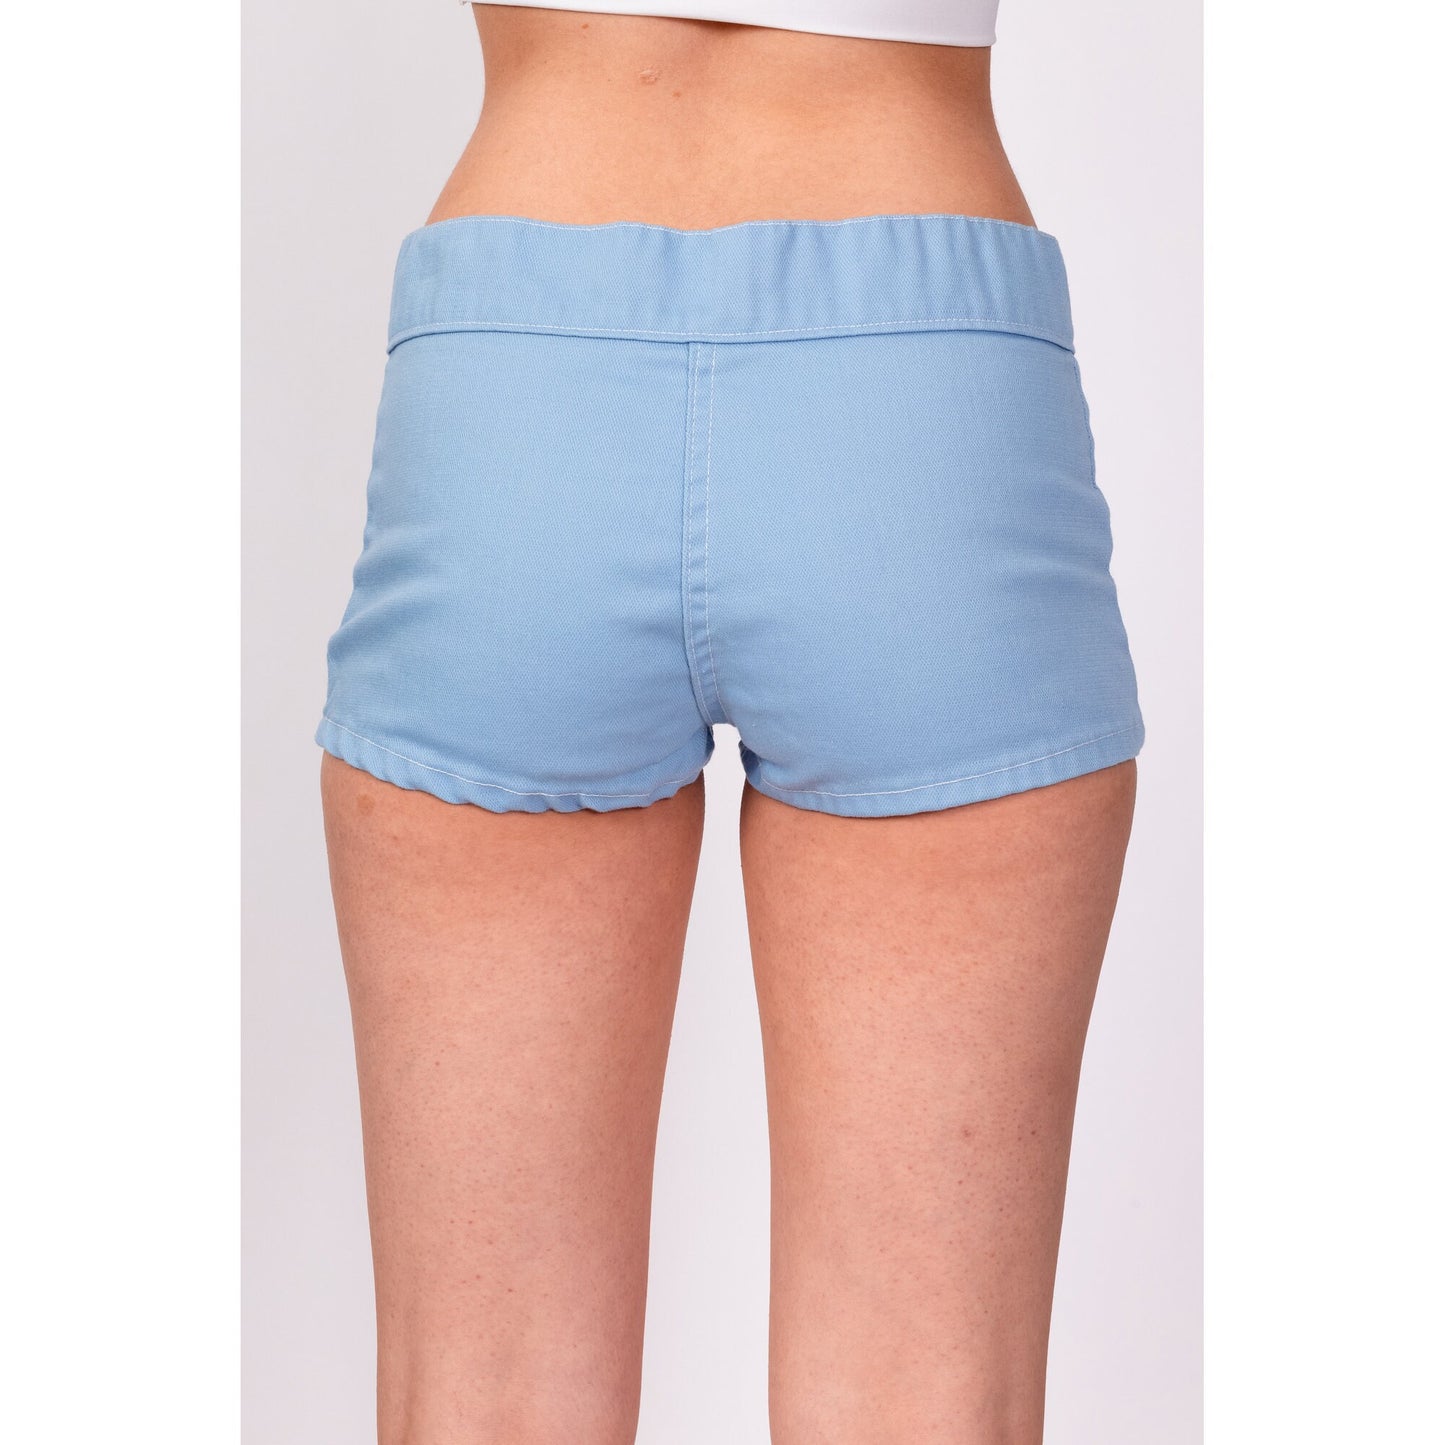 70s Baby Blue Tennis Booty Shorts - Unisex XS 